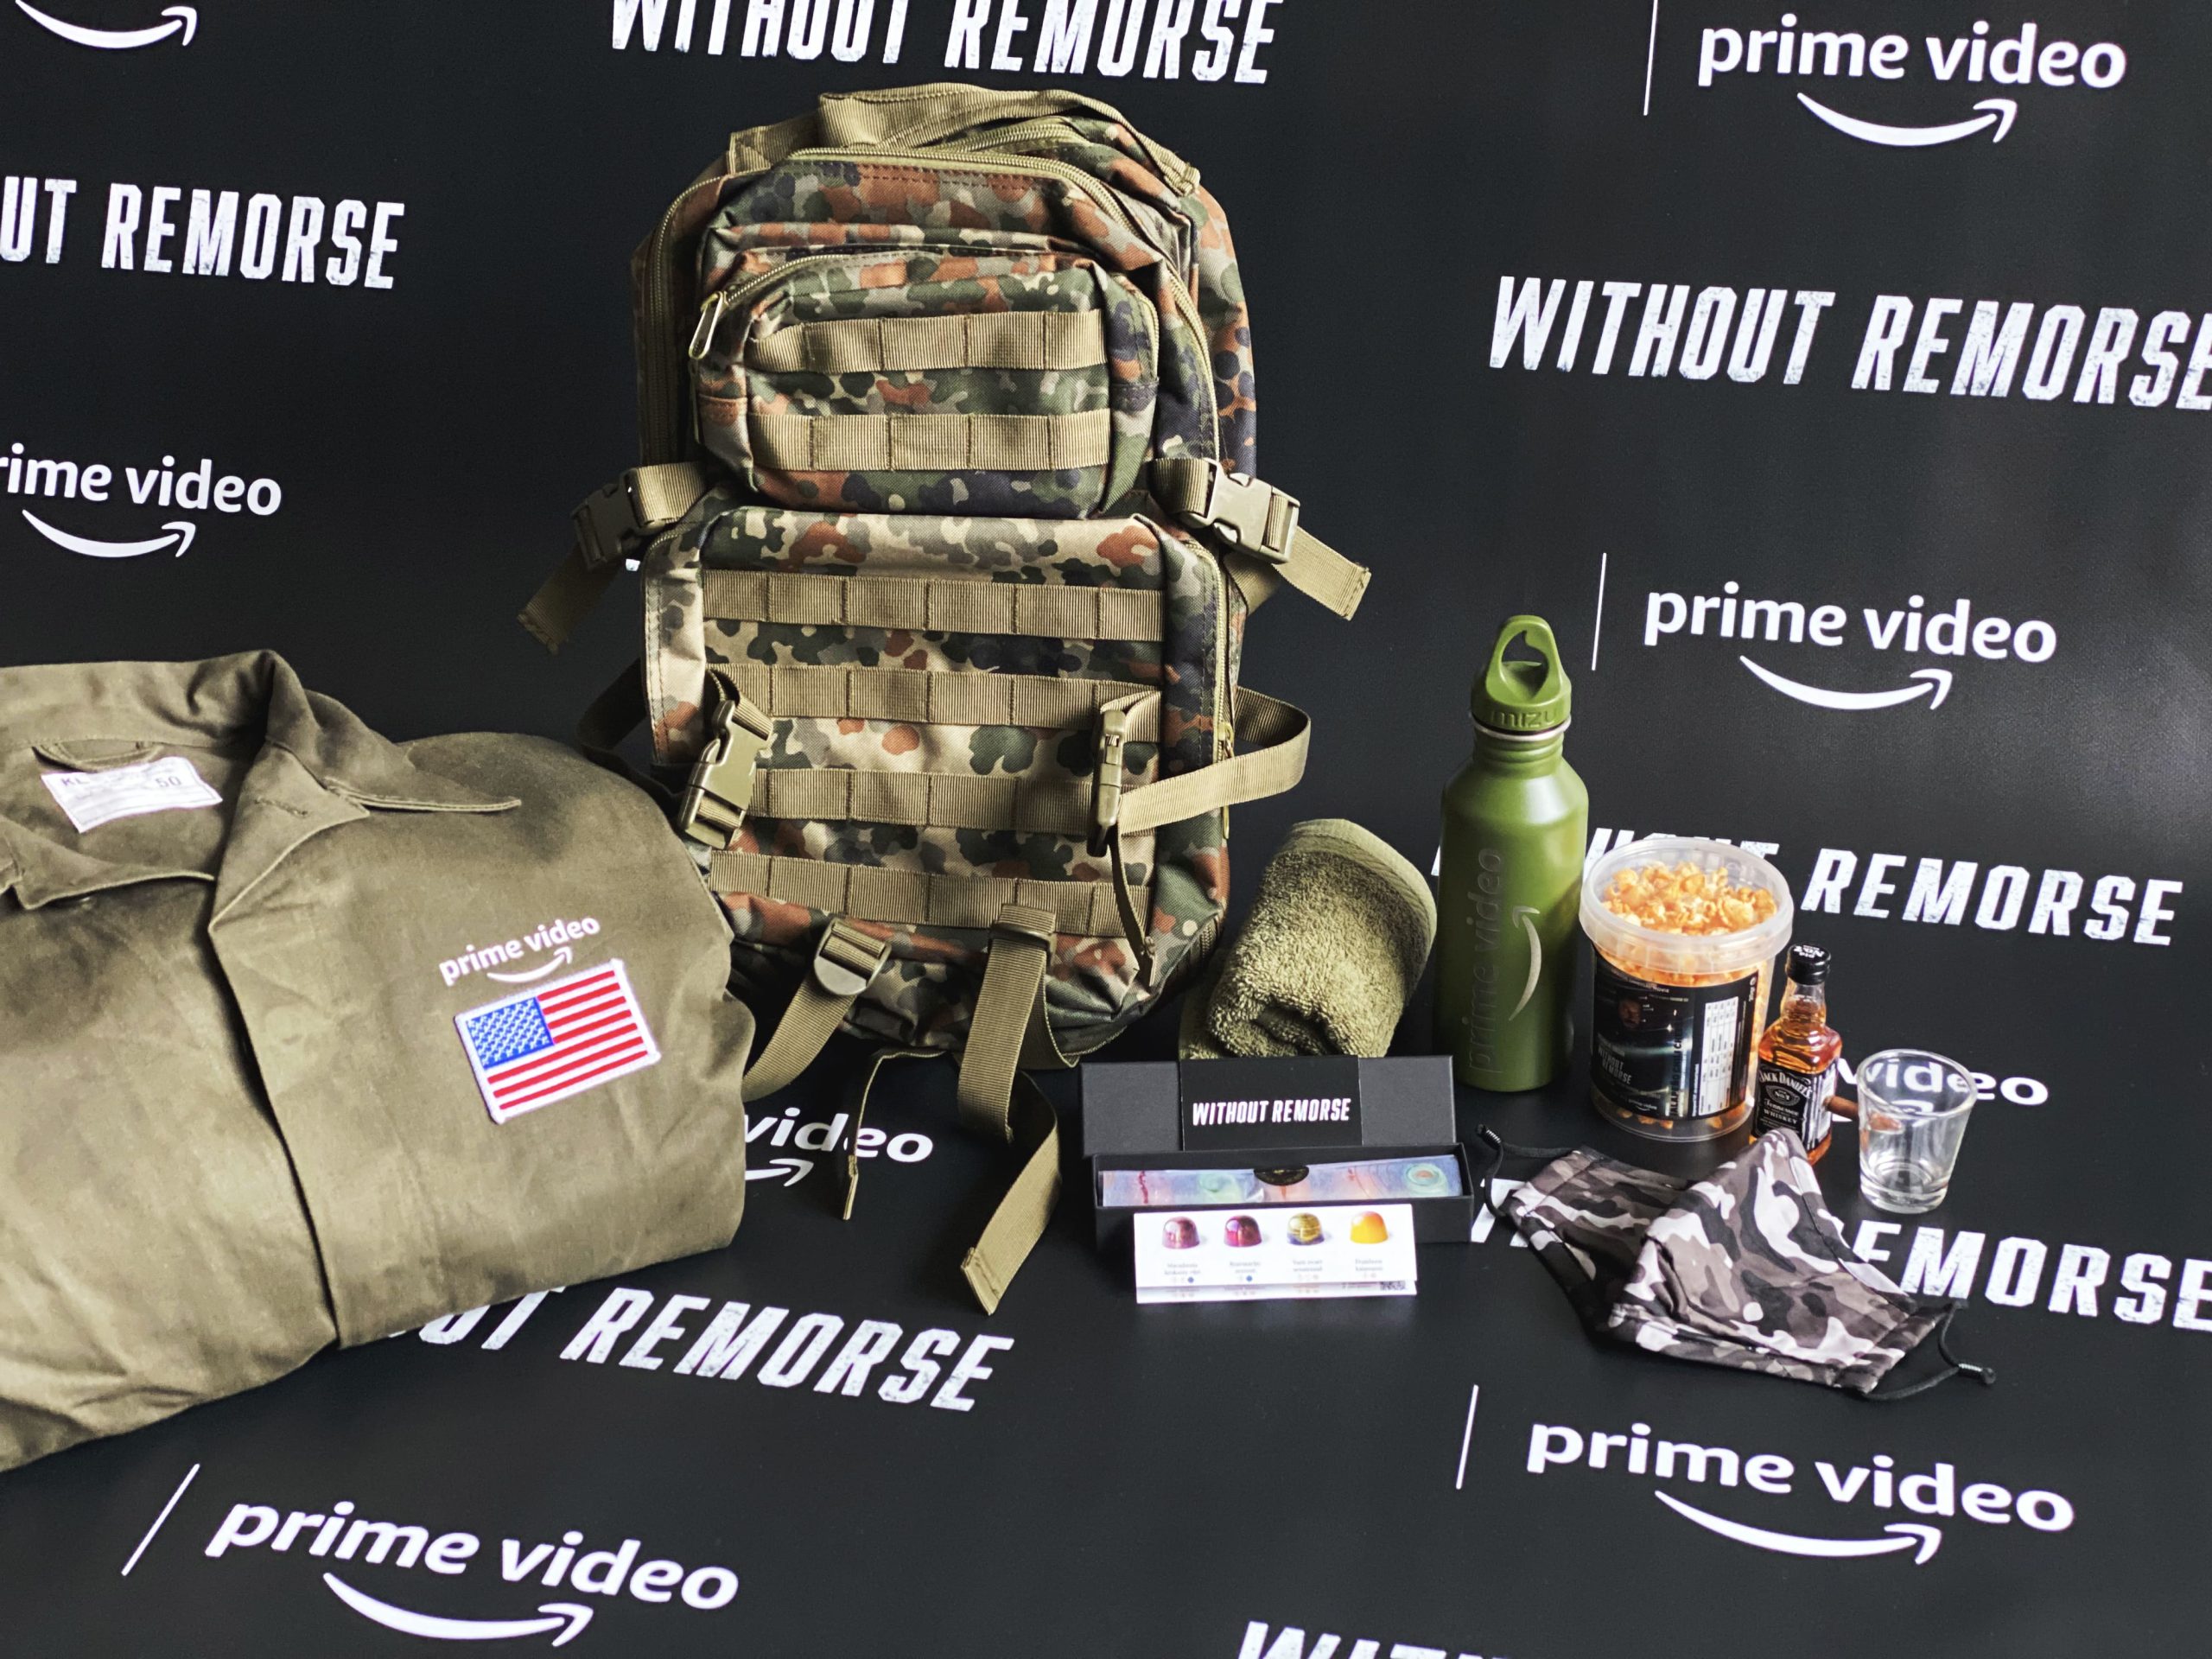 Goodiebags Online Premiere Without Remorse